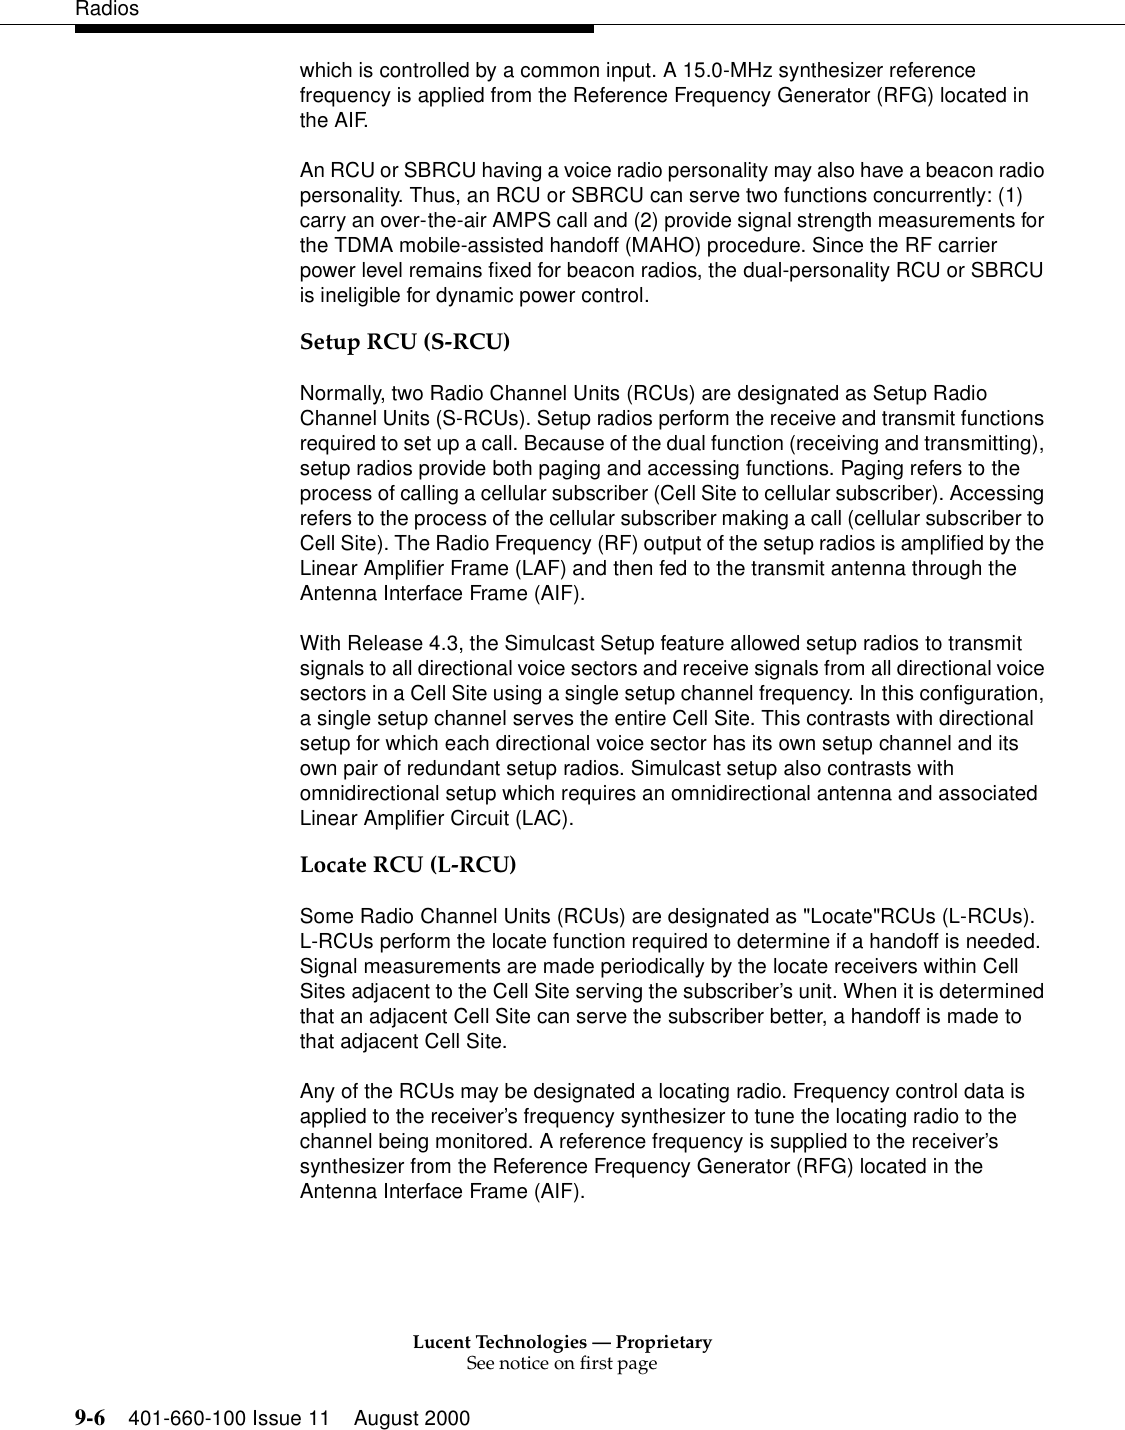 Lucent Technologies — ProprietarySee notice on first page9-6 401-660-100 Issue 11 August 2000Radioswhich is controlled by a common input. A 15.0-MHz synthesizer reference frequency is applied from the Reference Frequency Generator (RFG) located in the AIF. An RCU or SBRCU having a voice radio personality may also have a beacon radio personality. Thus, an RCU or SBRCU can serve two functions concurrently: (1) carry an over-the-air AMPS call and (2) provide signal strength measurements for the TDMA mobile-assisted handoff (MAHO) procedure. Since the RF carrier power level remains fixed for beacon radios, the dual-personality RCU or SBRCU is ineligible for dynamic power control. Setup RCU (S-RCU)Normally, two Radio Channel Units (RCUs) are designated as Setup Radio Channel Units (S-RCUs). Setup radios perform the receive and transmit functions required to set up a call. Because of the dual function (receiving and transmitting), setup radios provide both paging and accessing functions. Paging refers to the process of calling a cellular subscriber (Cell Site to cellular subscriber). Accessing refers to the process of the cellular subscriber making a call (cellular subscriber to Cell Site). The Radio Frequency (RF) output of the setup radios is amplified by the Linear Amplifier Frame (LAF) and then fed to the transmit antenna through the Antenna Interface Frame (AIF). With Release 4.3, the Simulcast Setup feature allowed setup radios to transmit signals to all directional voice sectors and receive signals from all directional voice sectors in a Cell Site using a single setup channel frequency. In this configuration, a single setup channel serves the entire Cell Site. This contrasts with directional setup for which each directional voice sector has its own setup channel and its own pair of redundant setup radios. Simulcast setup also contrasts with omnidirectional setup which requires an omnidirectional antenna and associated Linear Amplifier Circuit (LAC). Locate RCU (L-RCU)Some Radio Channel Units (RCUs) are designated as &quot;Locate&quot;RCUs (L-RCUs). L-RCUs perform the locate function required to determine if a handoff is needed. Signal measurements are made periodically by the locate receivers within Cell Sites adjacent to the Cell Site serving the subscriber’s unit. When it is determined that an adjacent Cell Site can serve the subscriber better, a handoff is made to that adjacent Cell Site. Any of the RCUs may be designated a locating radio. Frequency control data is applied to the receiver’s frequency synthesizer to tune the locating radio to the channel being monitored. A reference frequency is supplied to the receiver’s synthesizer from the Reference Frequency Generator (RFG) located in the Antenna Interface Frame (AIF). 